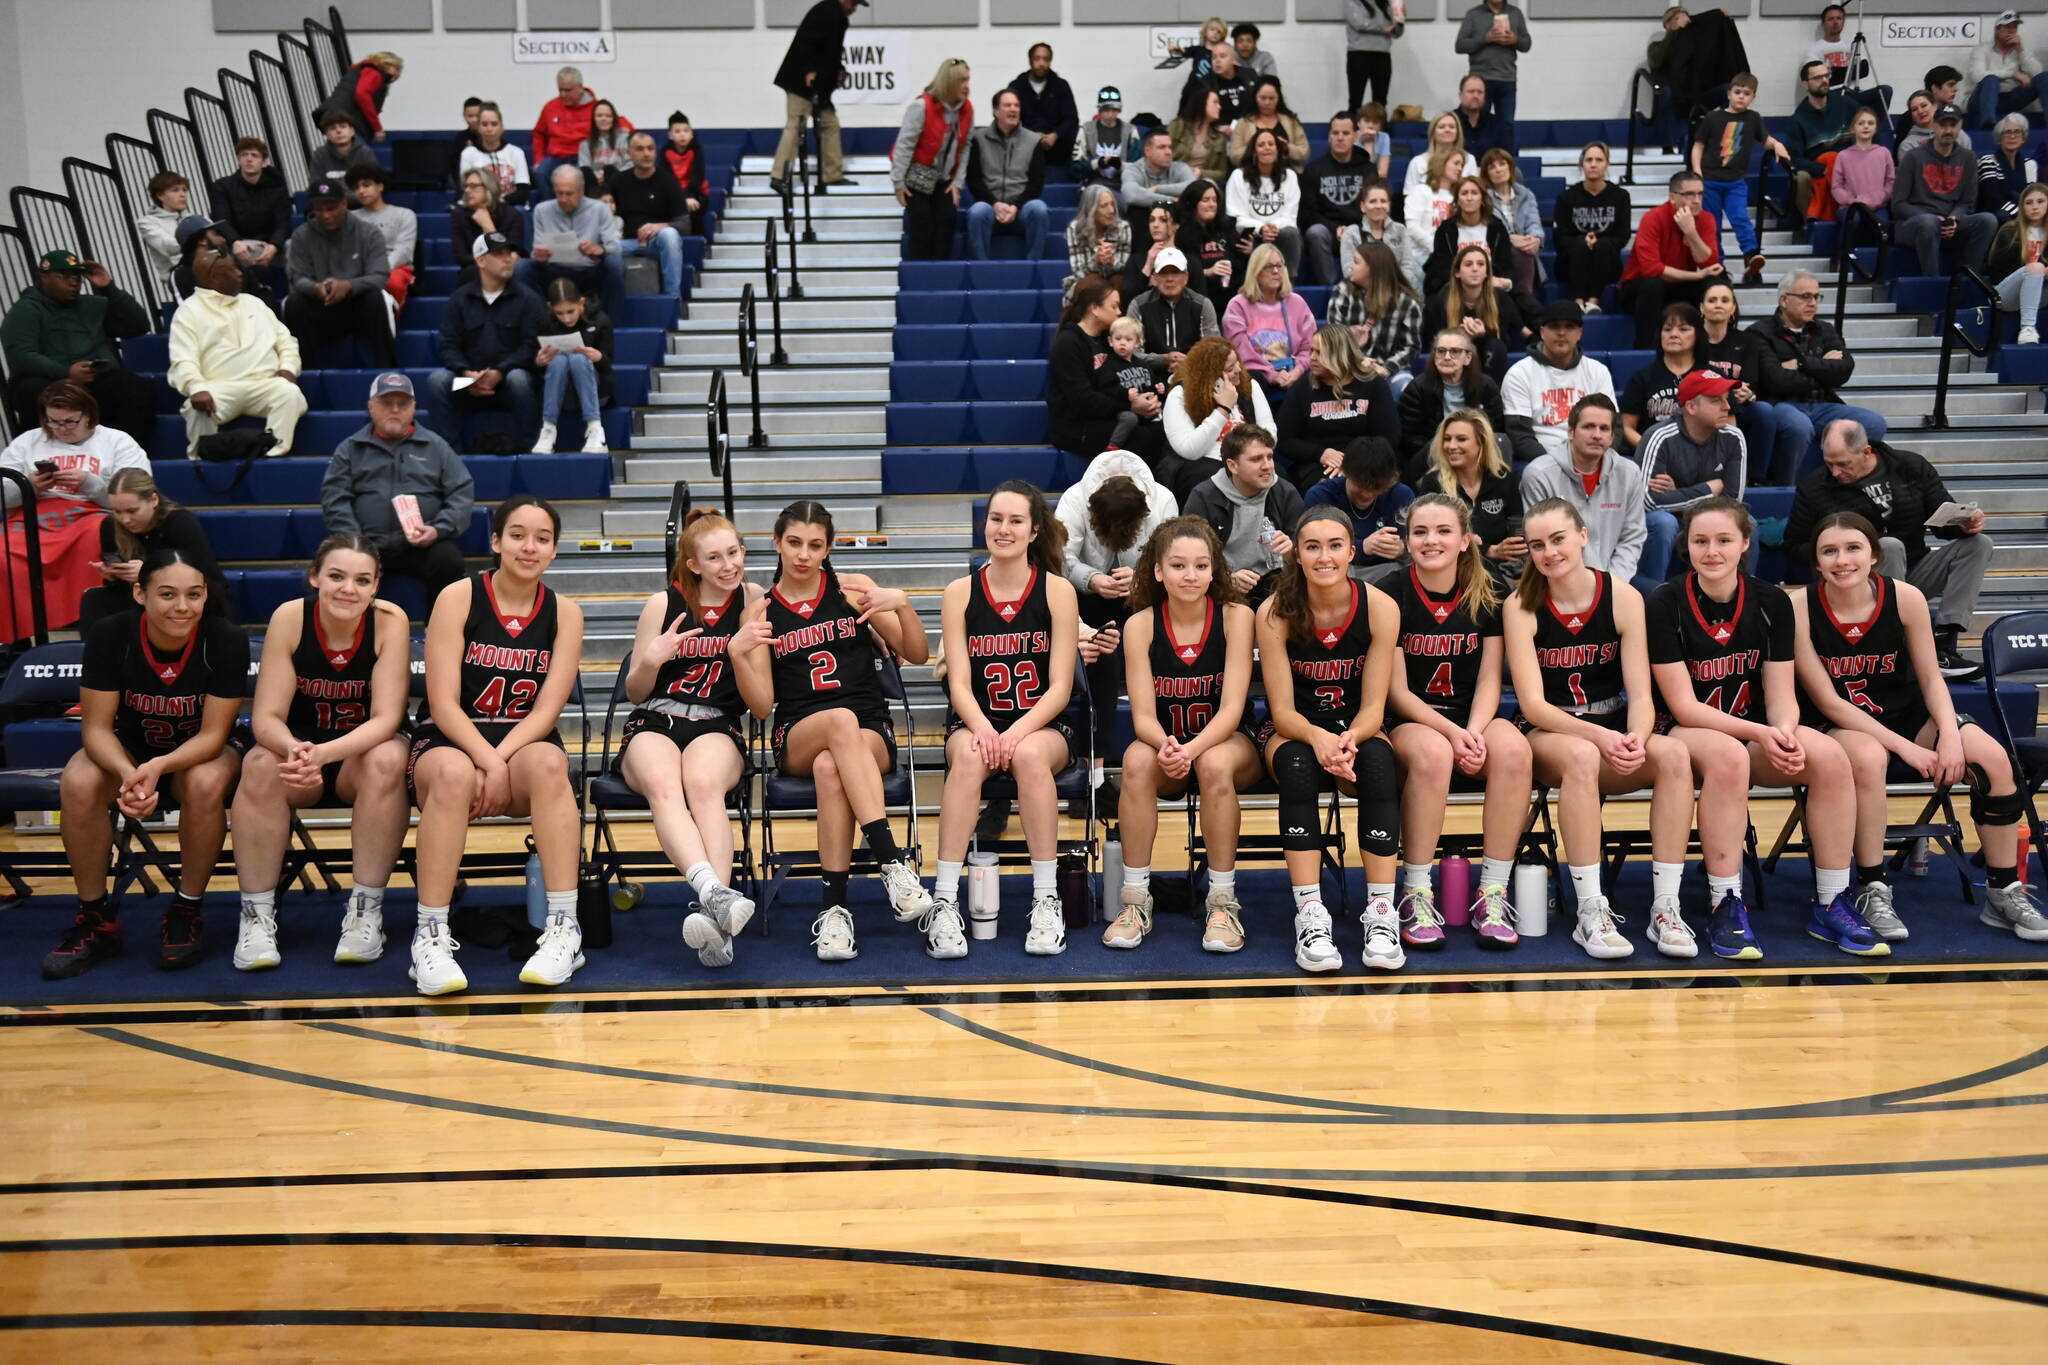 The Mount Si girls basketball team poses for a photo before playing Bellarmine Prep on Feb. 25. Photo courtesy of Calder Productions.